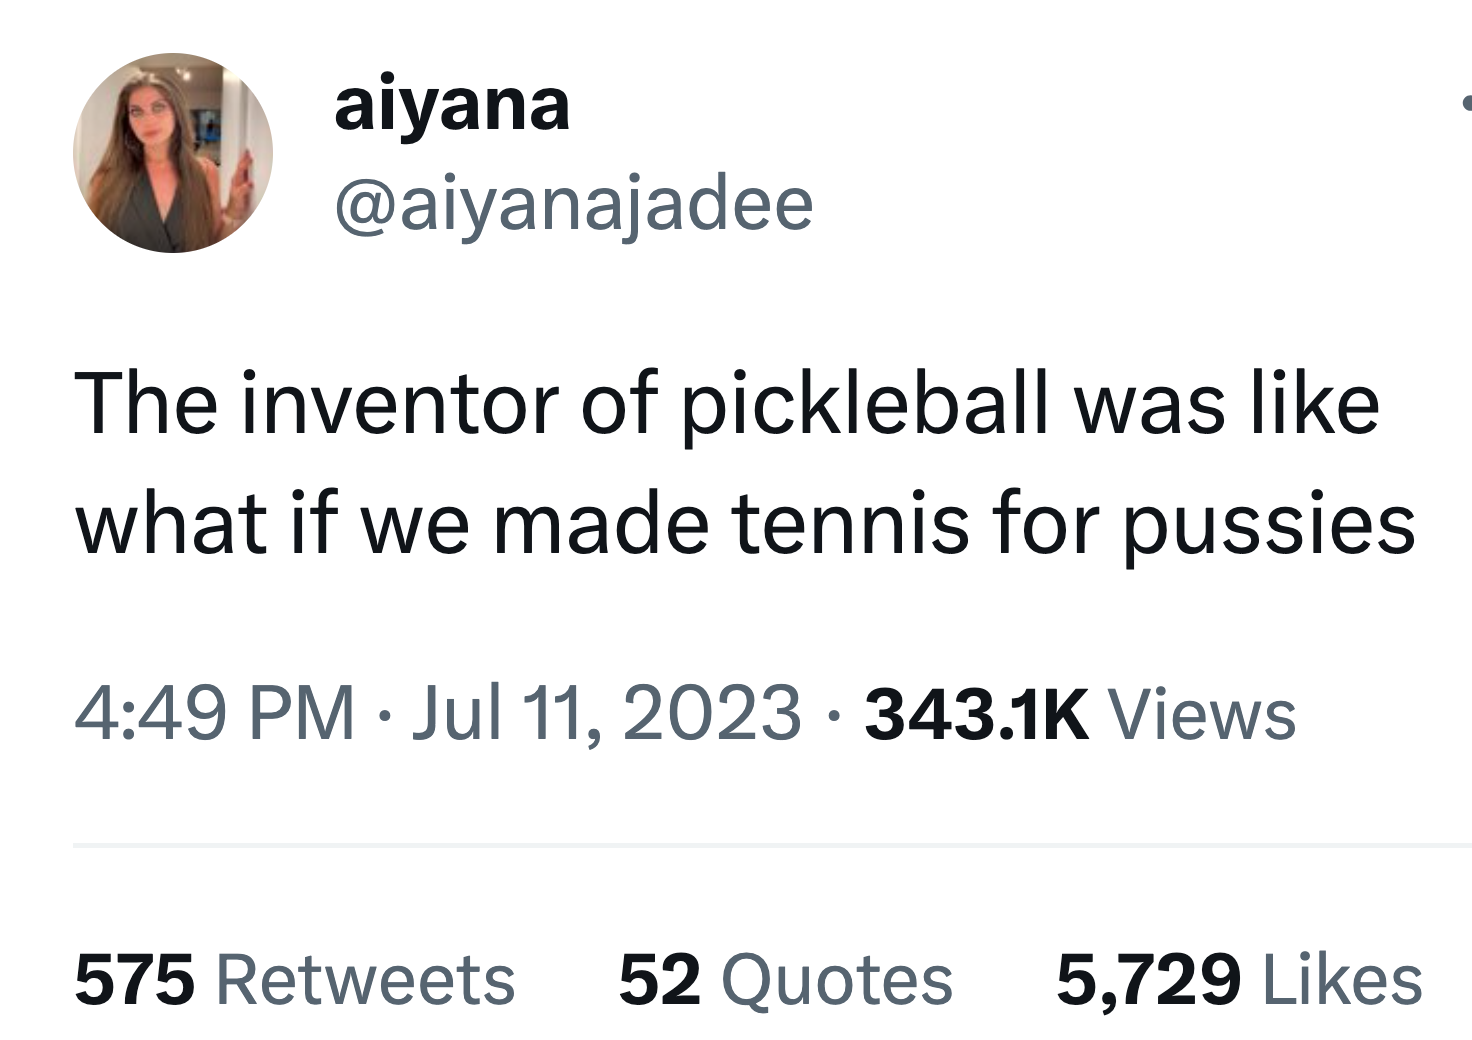 twitter highlights funny tweets  - angle - aiyana The inventor of pickleball was what if we made tennis for pussies Views 575 52 Quotes 5,729